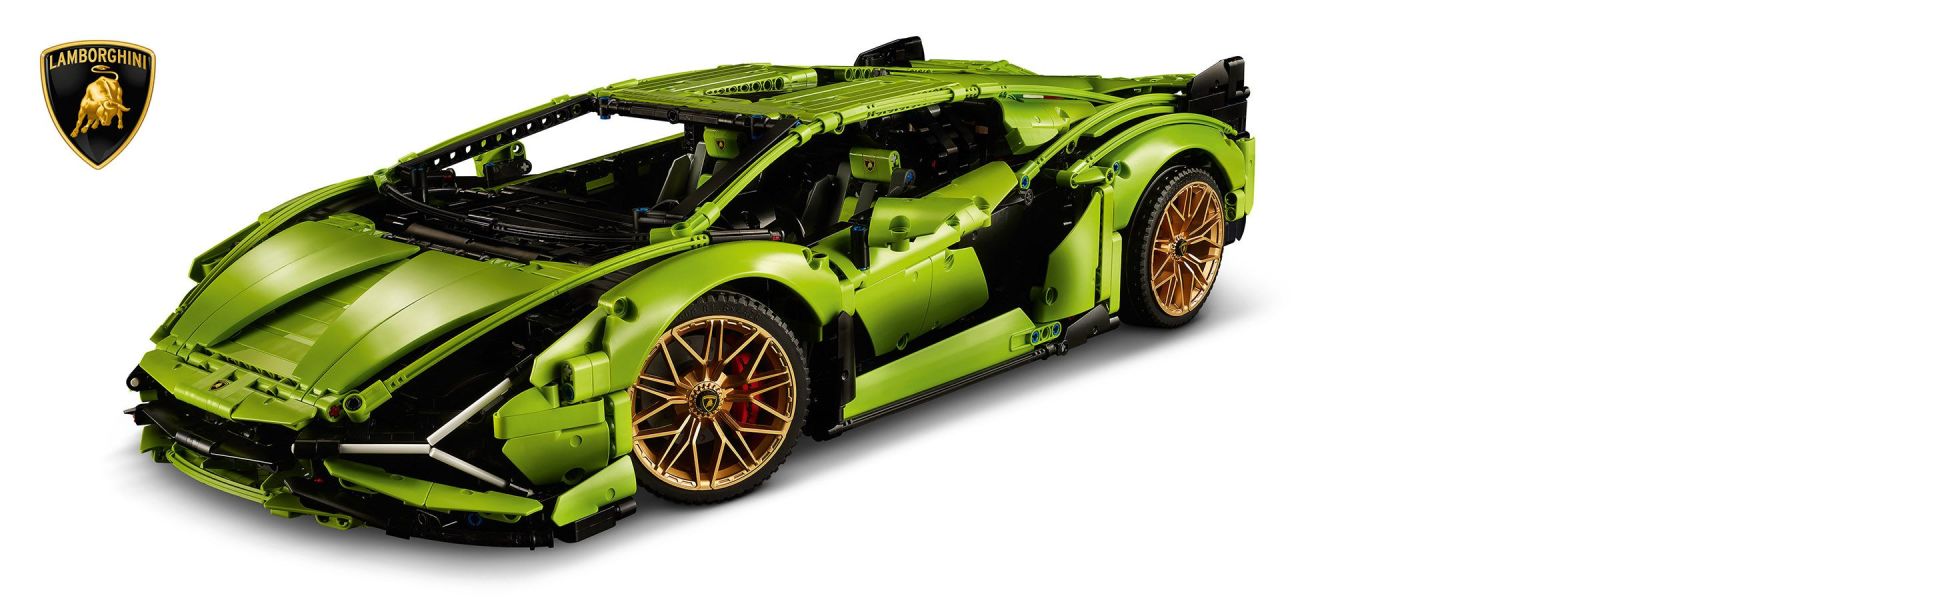 LEGO Technic Lamborghini Sián FKP 37 42115 Building Set - Classic Super Car  Model Kit, Exotic Eye-Catching Display, Home or Office Décor, Ideal for  Adults or Car Enthusiasts 